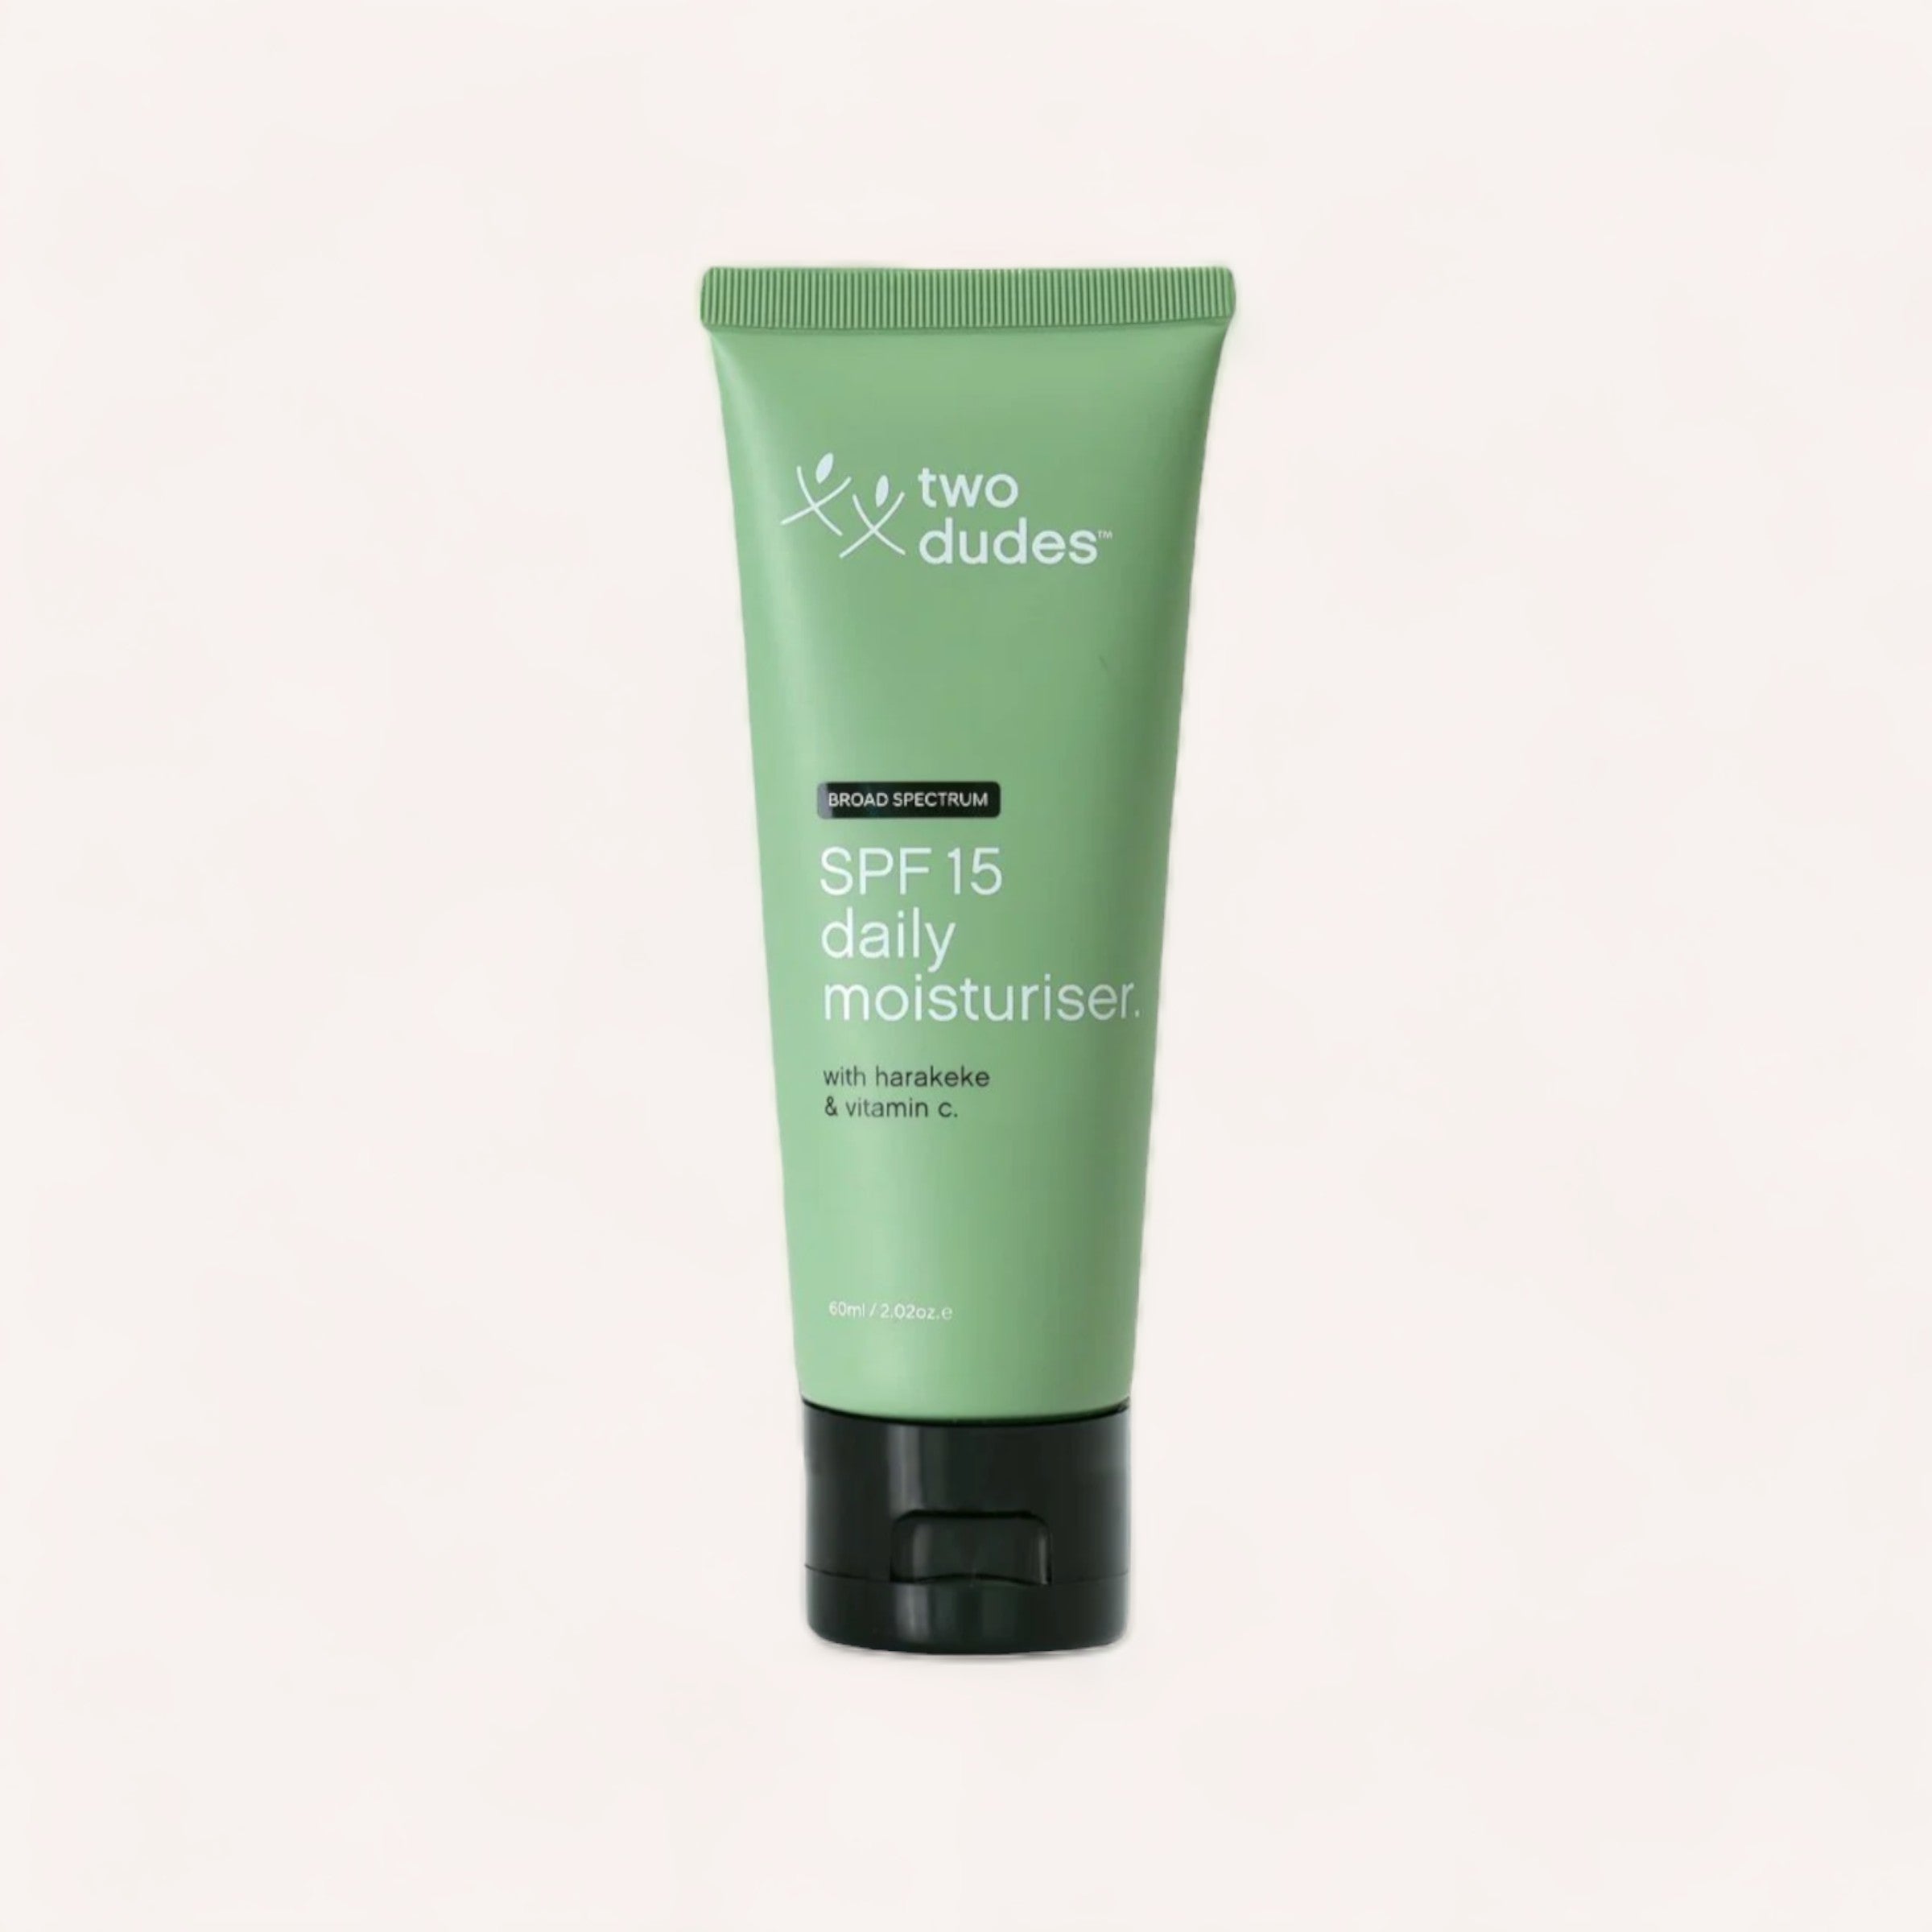 A tube of "Two Dudes" brand SPF15 Daily Moisturiser with harakeke & vitamin c against a neutral background.